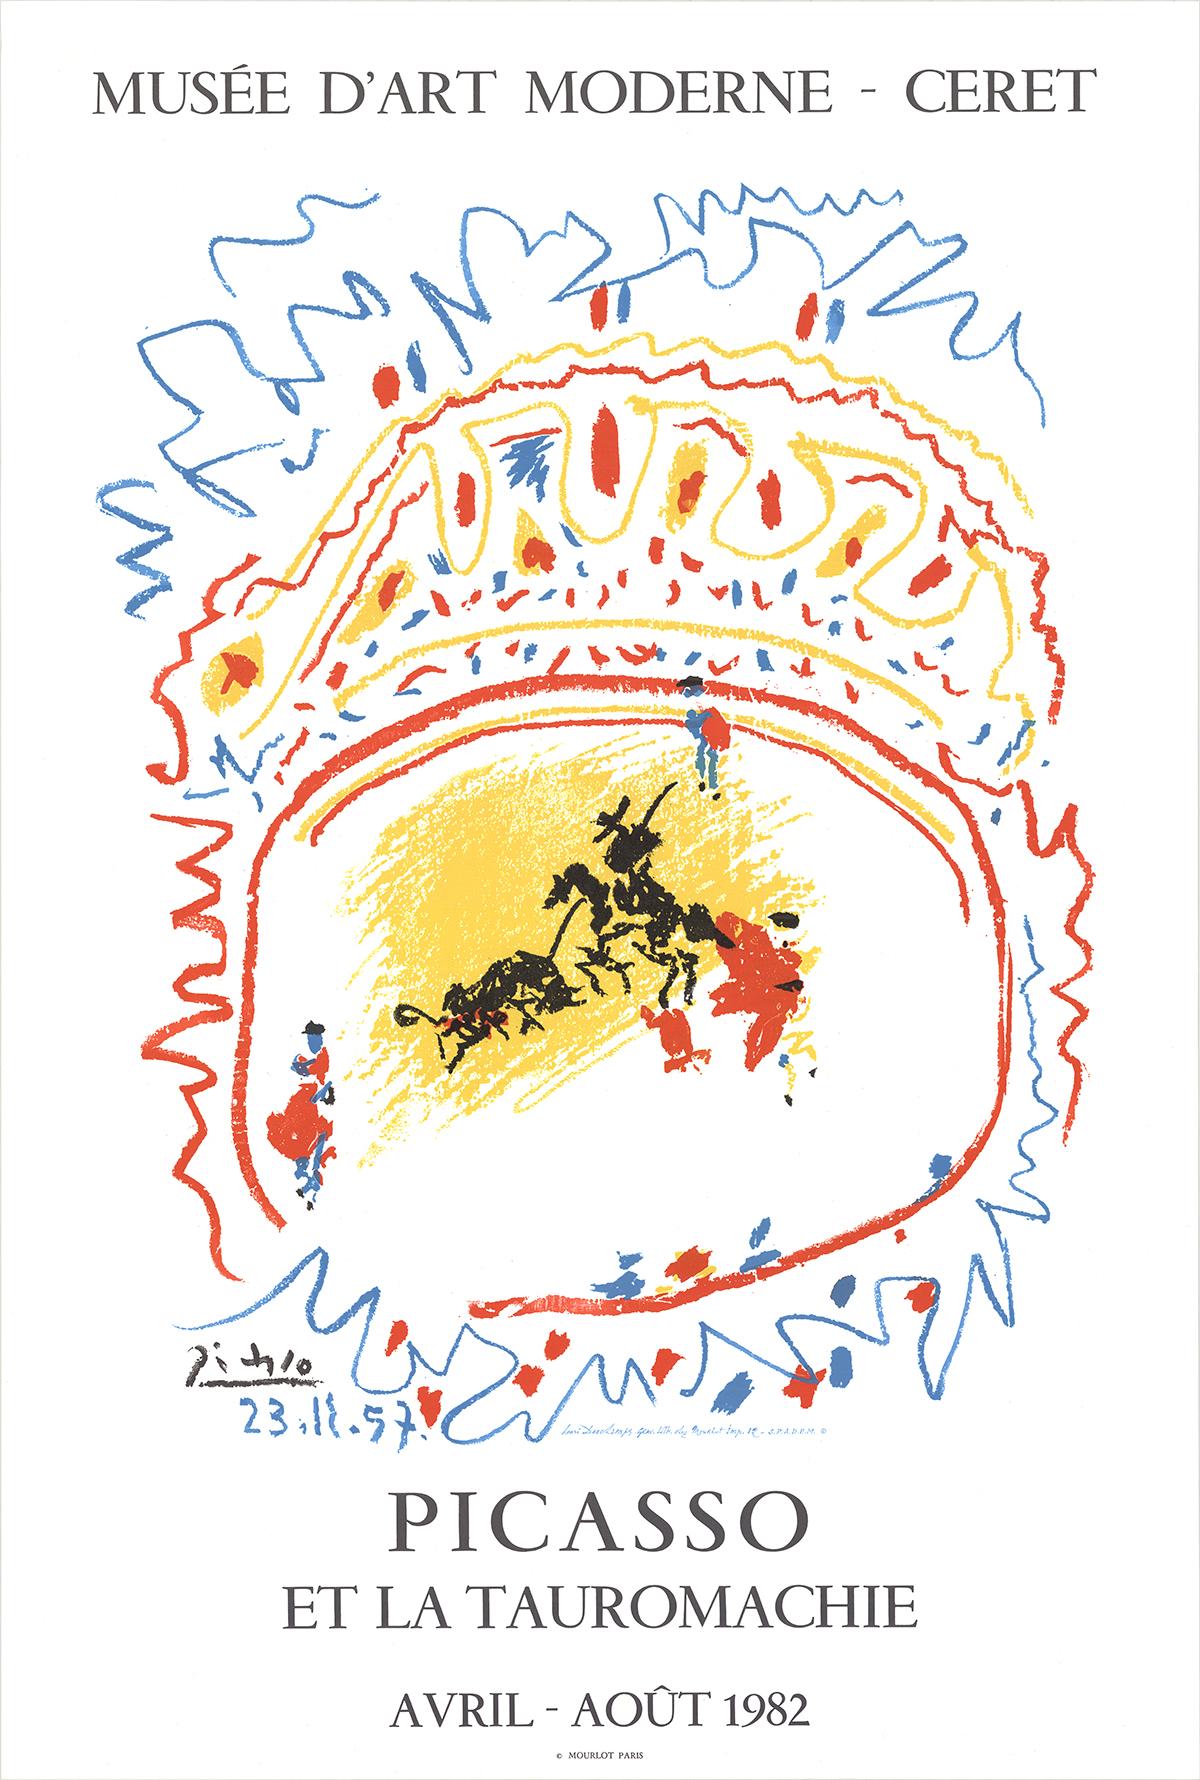 Color lithograph after (d'apres) Picasso, recreated by Henri Deschamps on the presses of Mourlot in Paris for the benefit of the Musee D'Art Moderne in Ceret France in 1982.  The title of the exhibition was Picasso et la Tauromachie.
